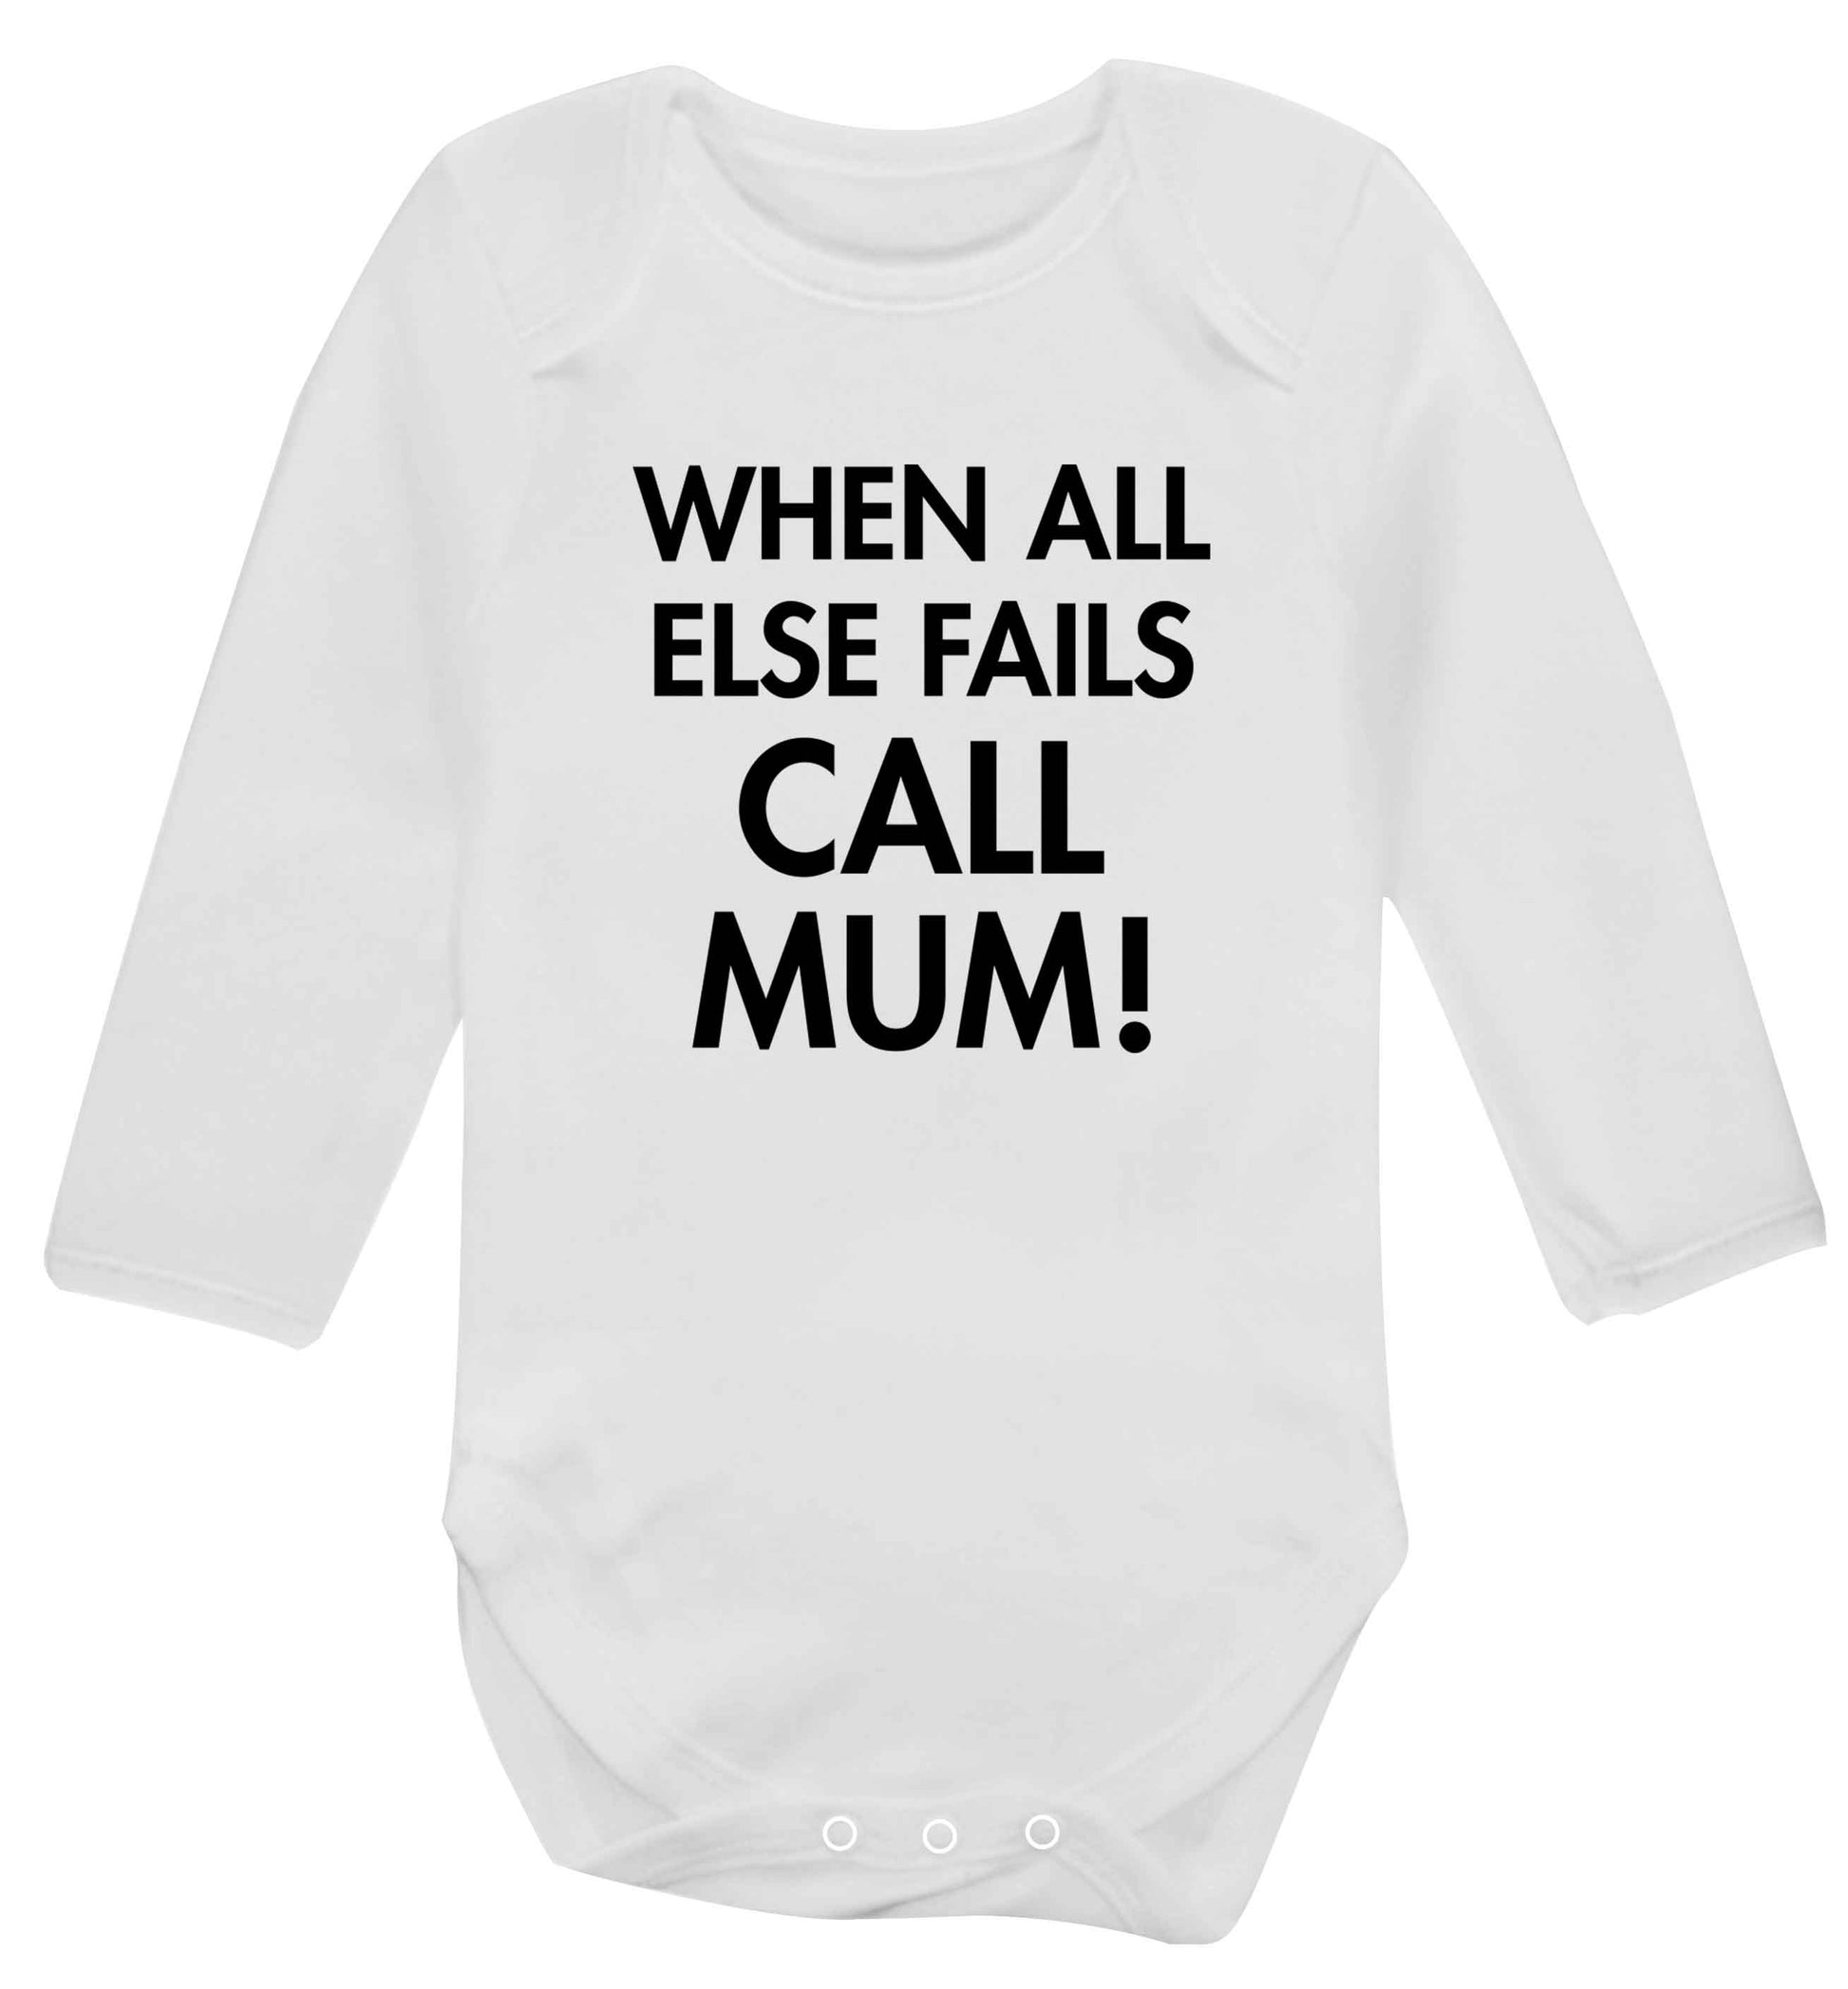 When all else fails call mum! baby vest long sleeved white 6-12 months